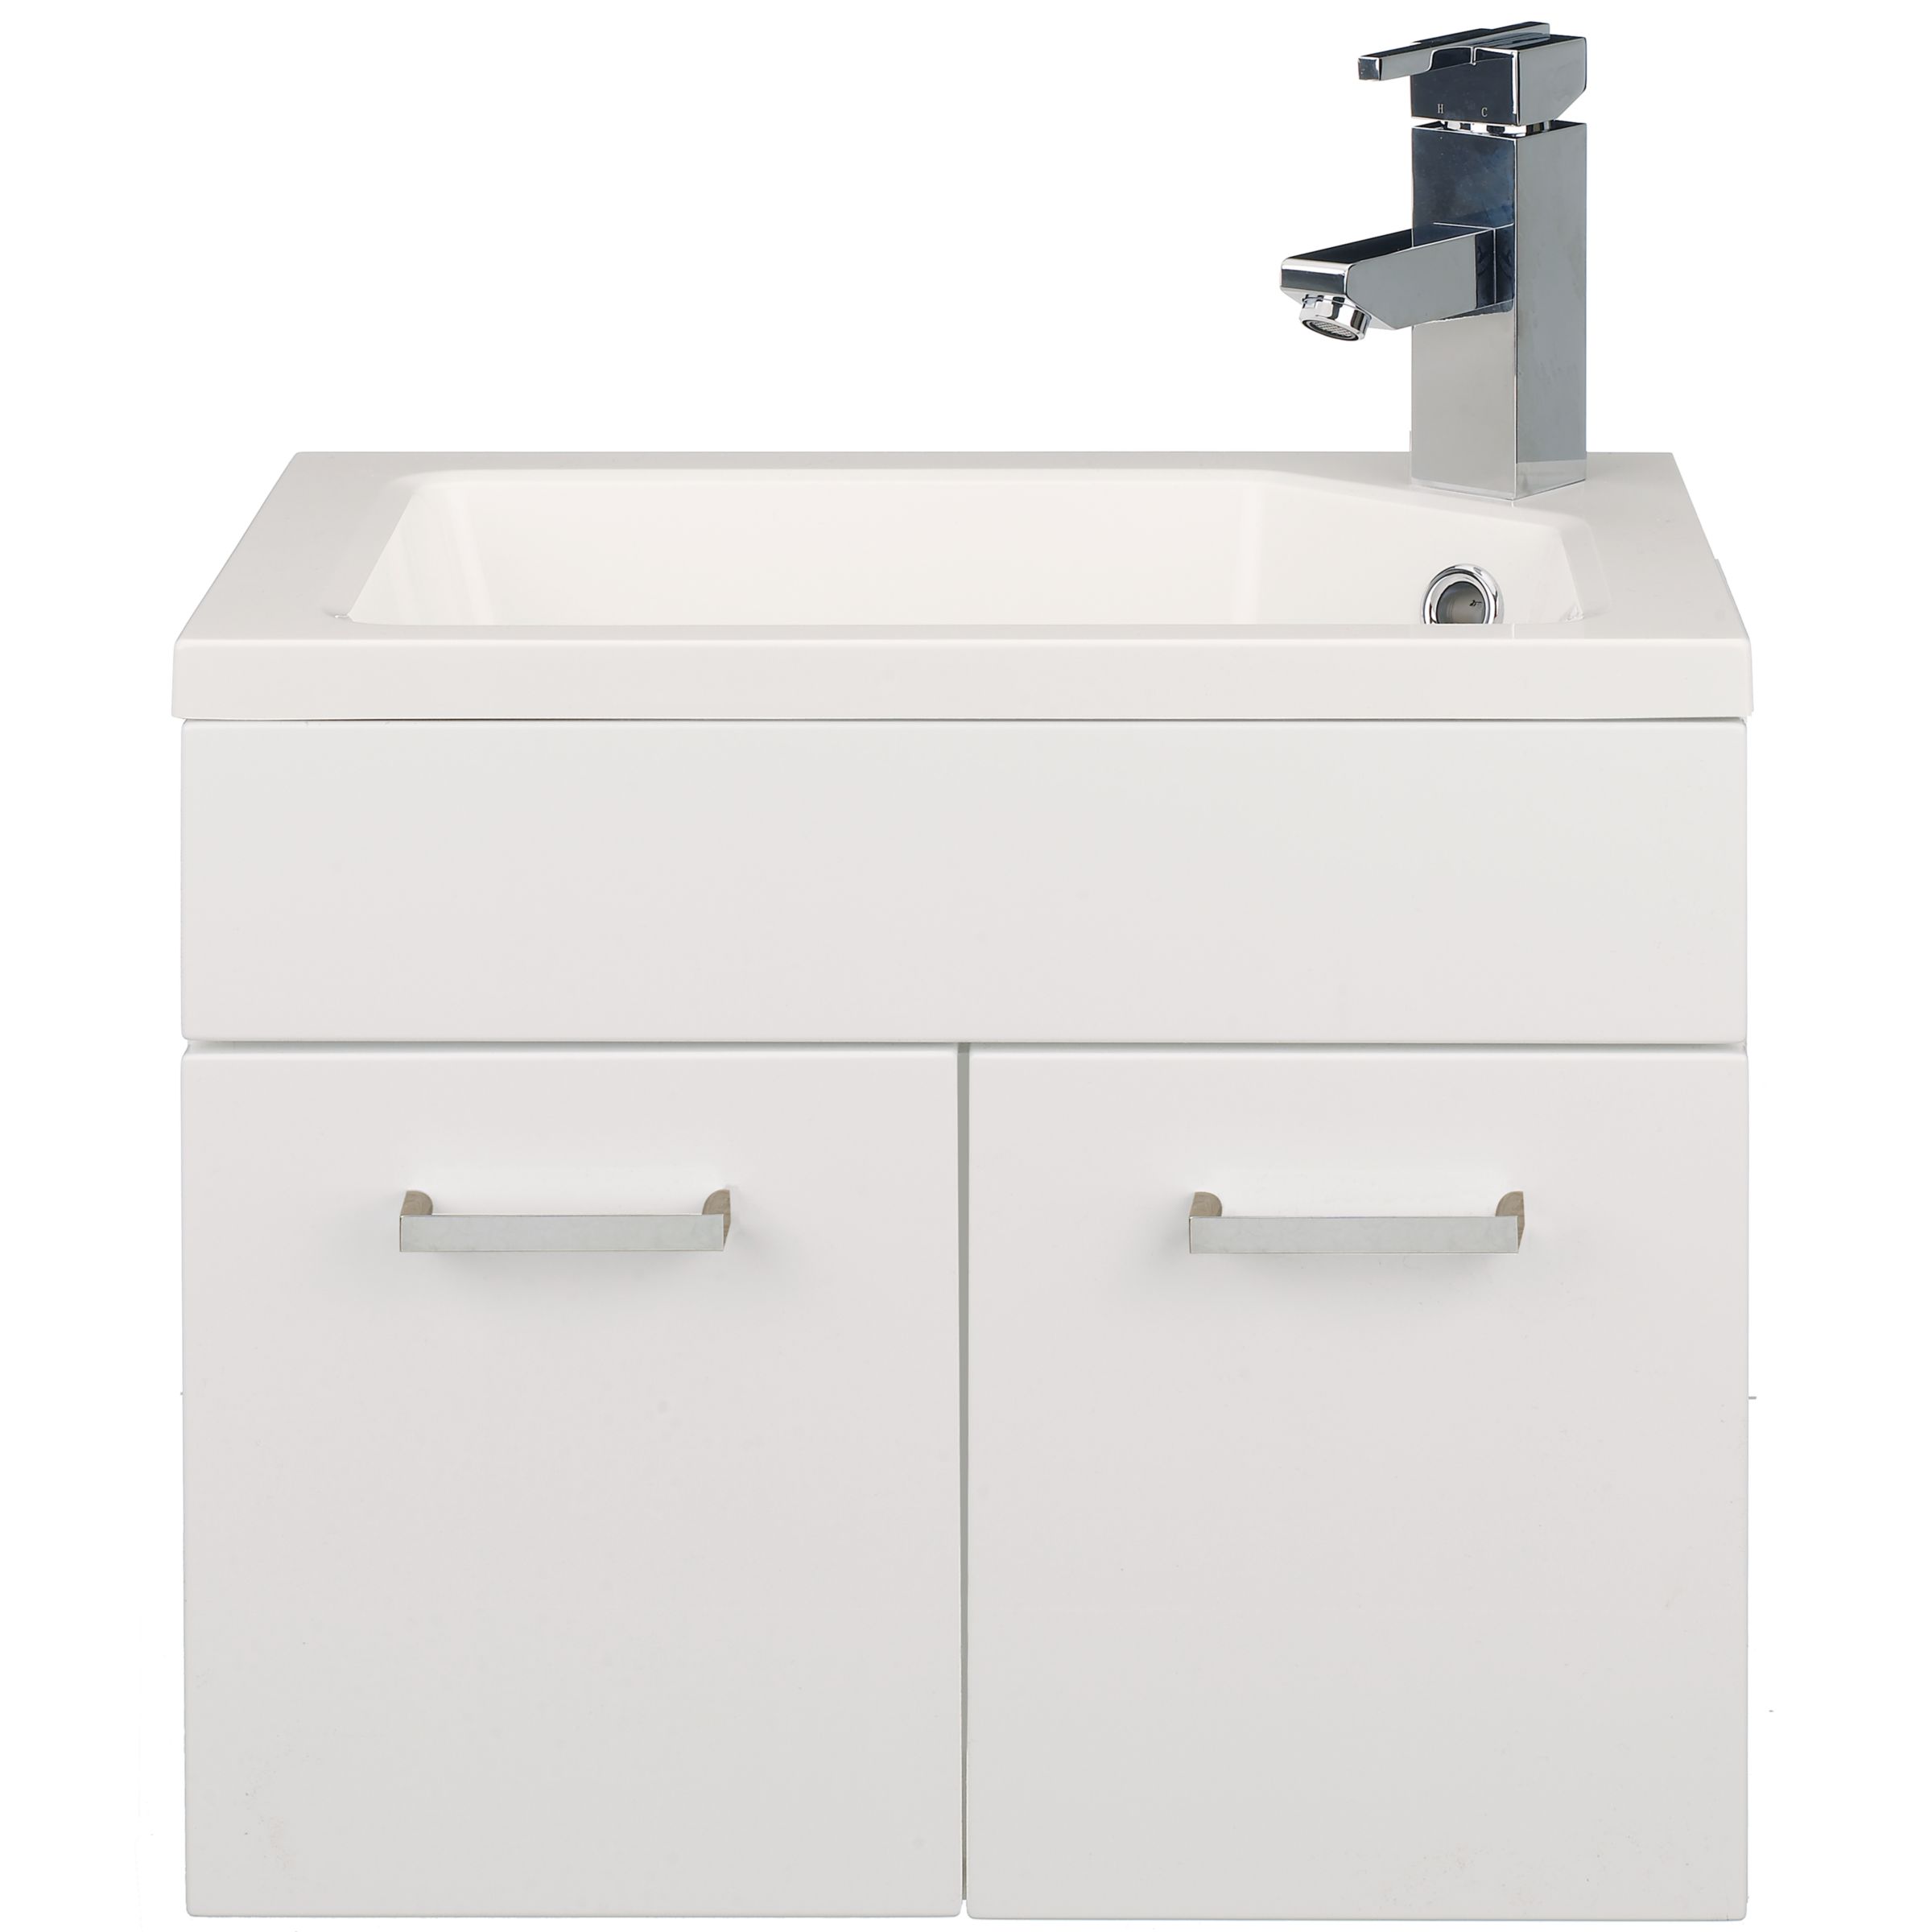 Cloakroom Double Door Vanity Unit including Basin and Tap, Gloss White at John Lewis